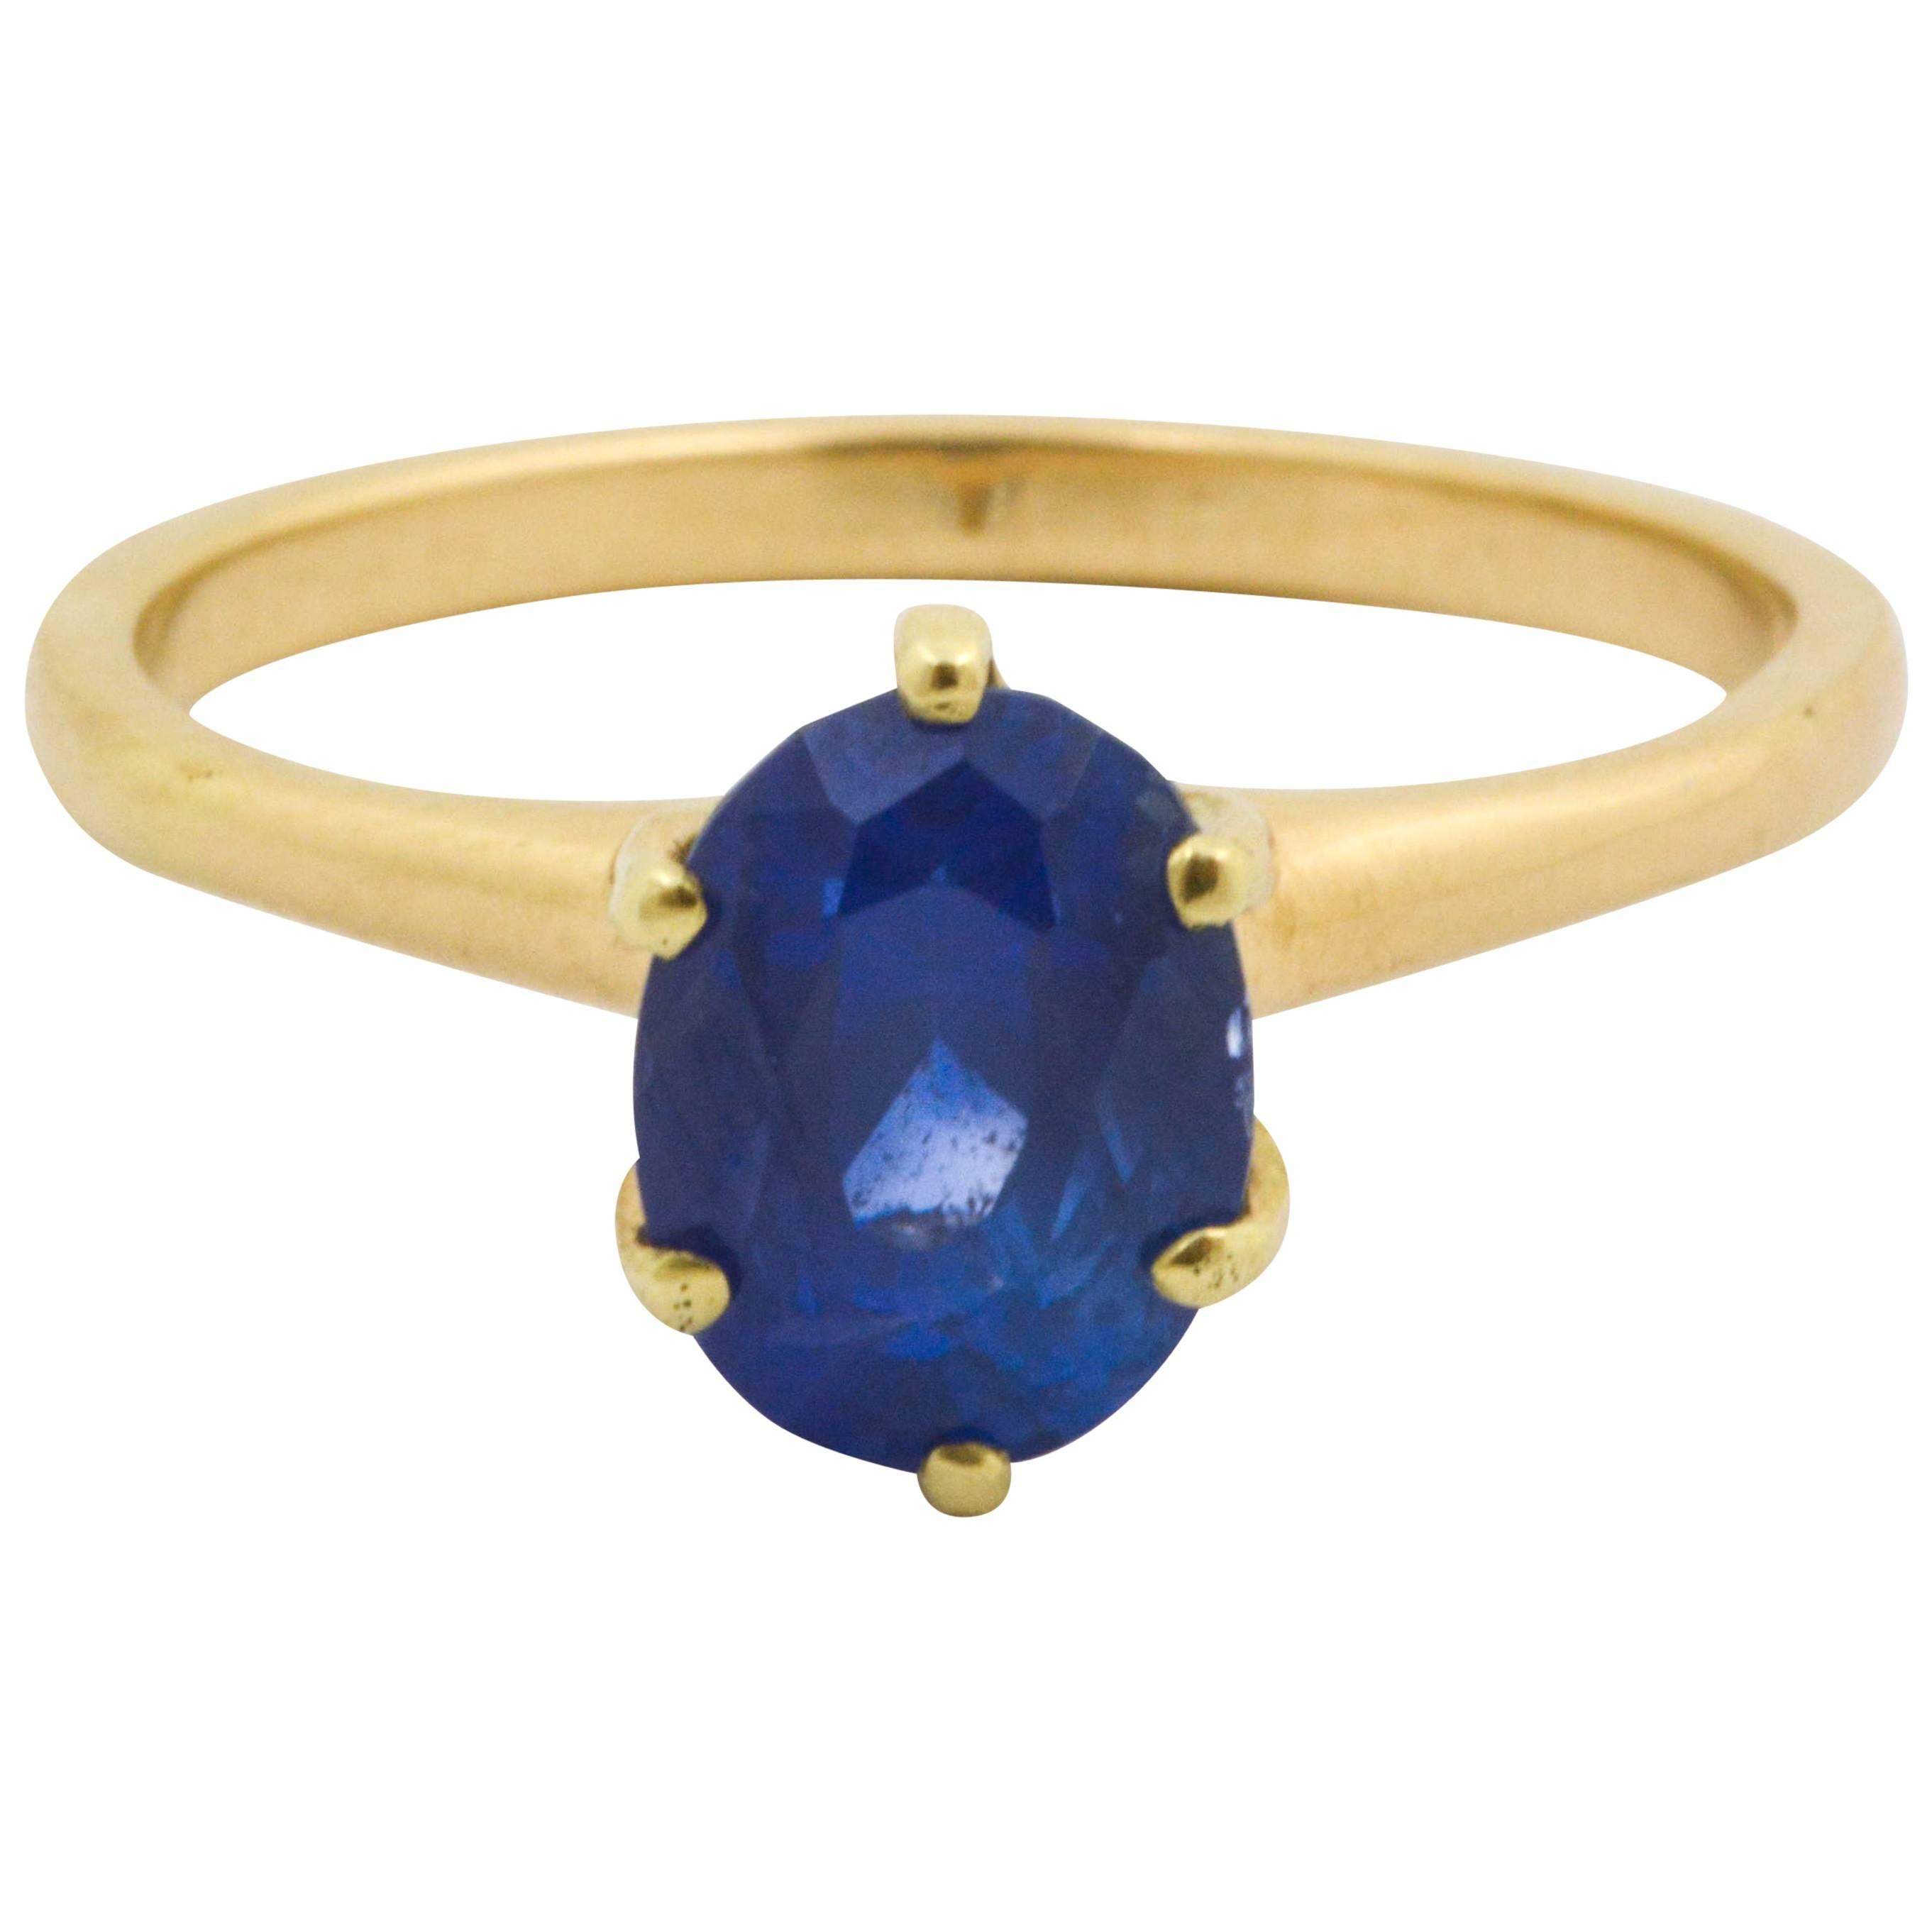 The simply sophisticated style of a 3.01 carat oval cut sapphire is set in a beautiful traditional solitaire ring. This Oval blue sapphire is set in a 14kt yellow gold ring. The sapphire’s intense blue color is sure to catch any eye in this